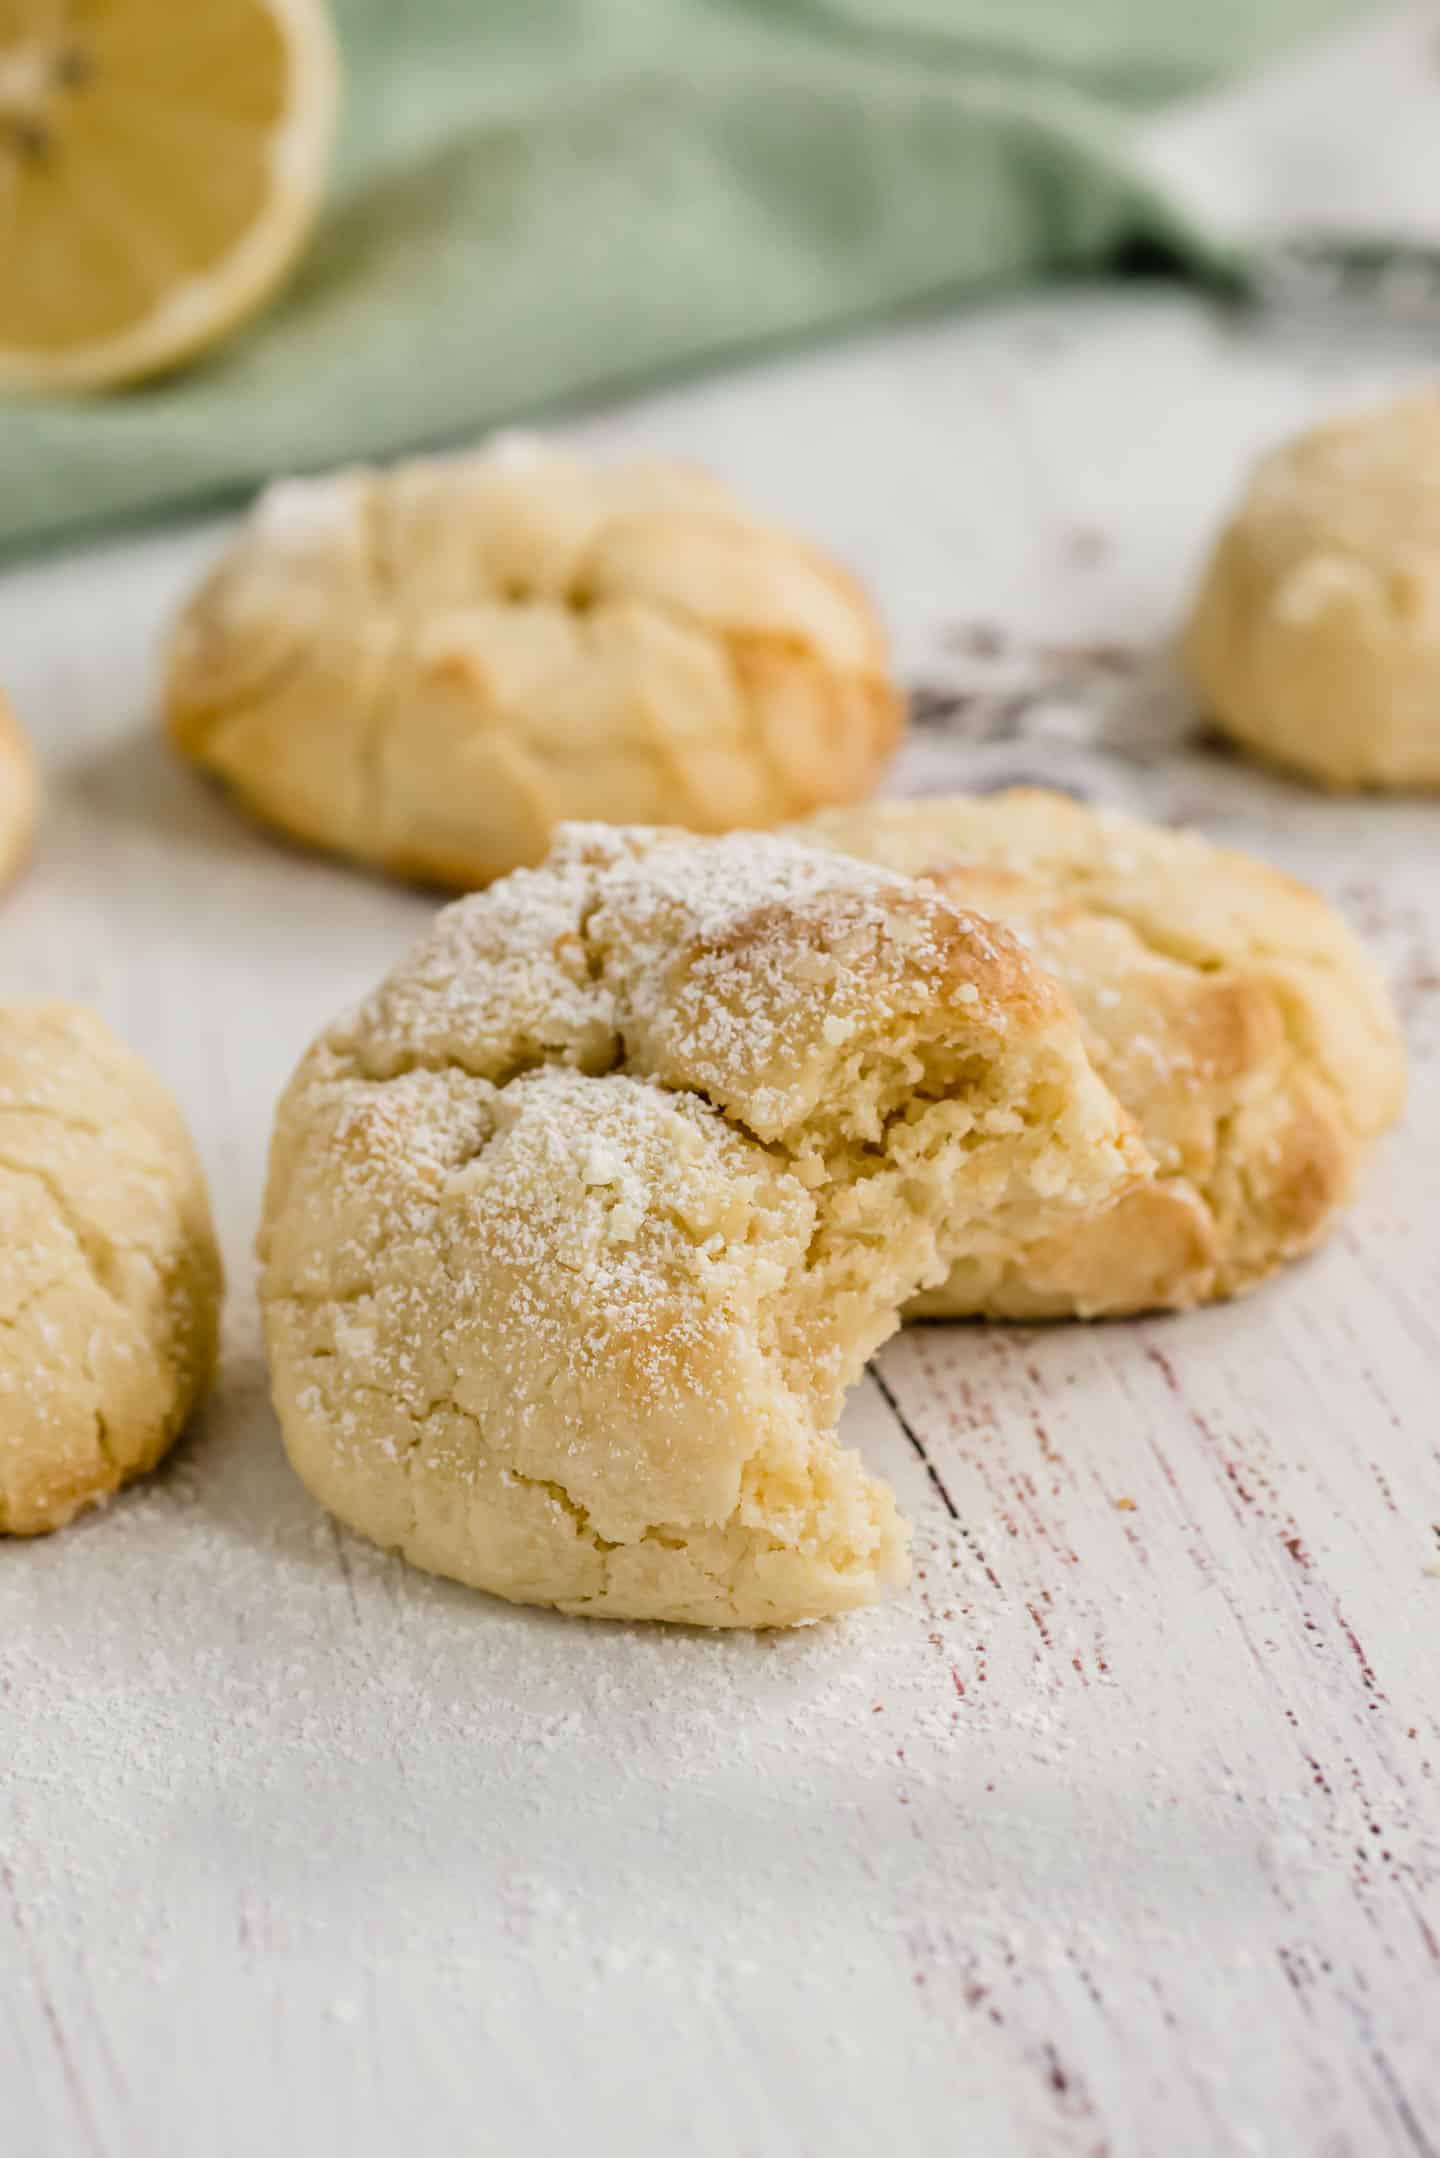 If you are into lemon, you'll love these made-from-scratch Lemon Crinkle Cookies. Chewy on the inside with slightly crispy edges that melt in your mouth.